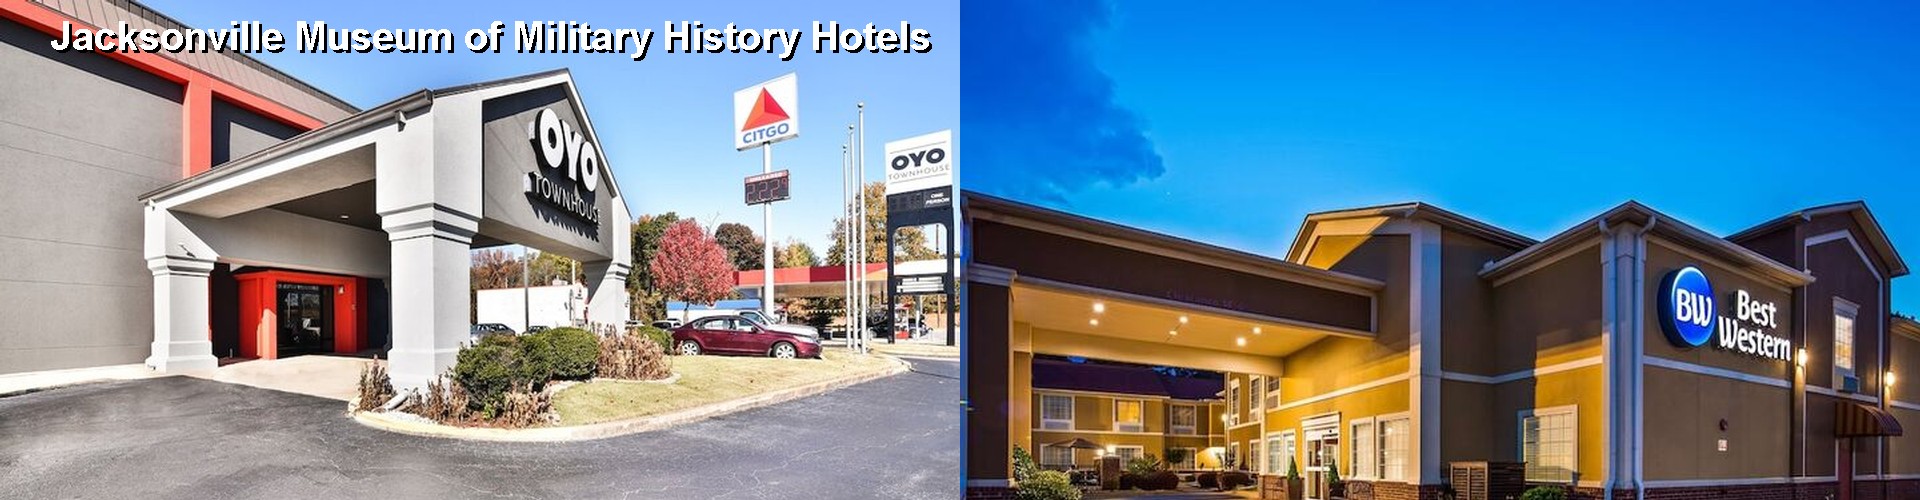 5 Best Hotels near Jacksonville Museum of Military History